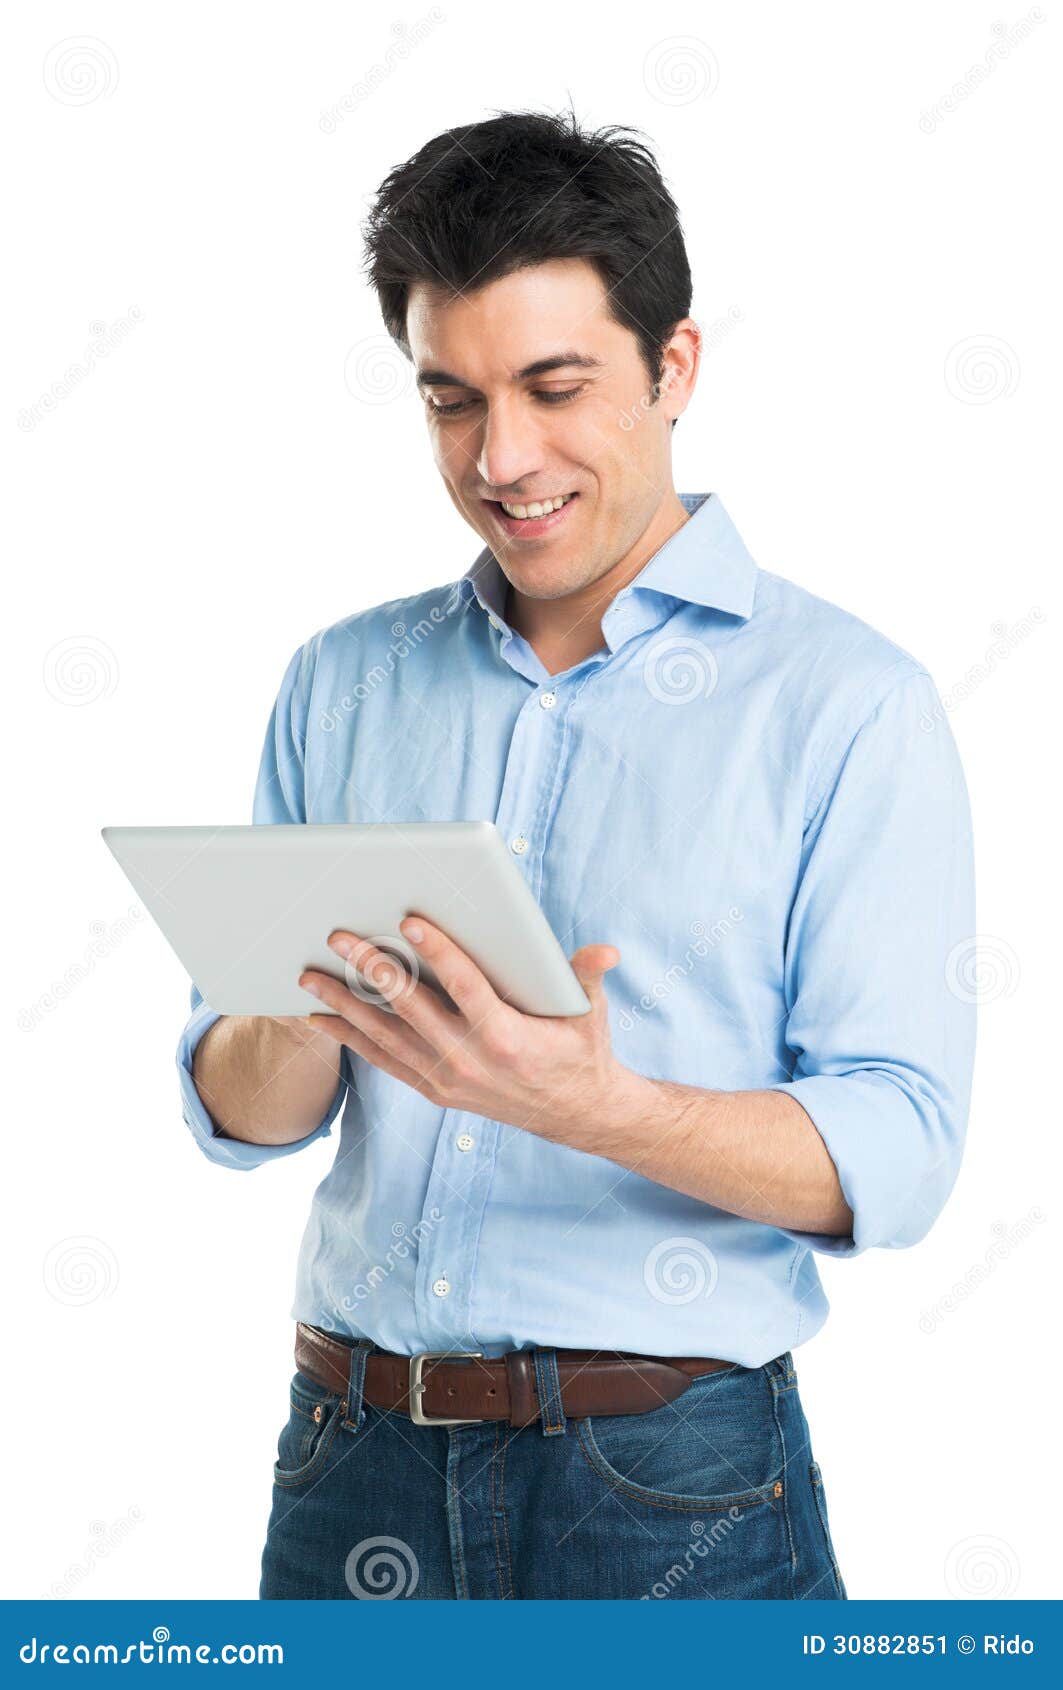 happy young man using digital tablet